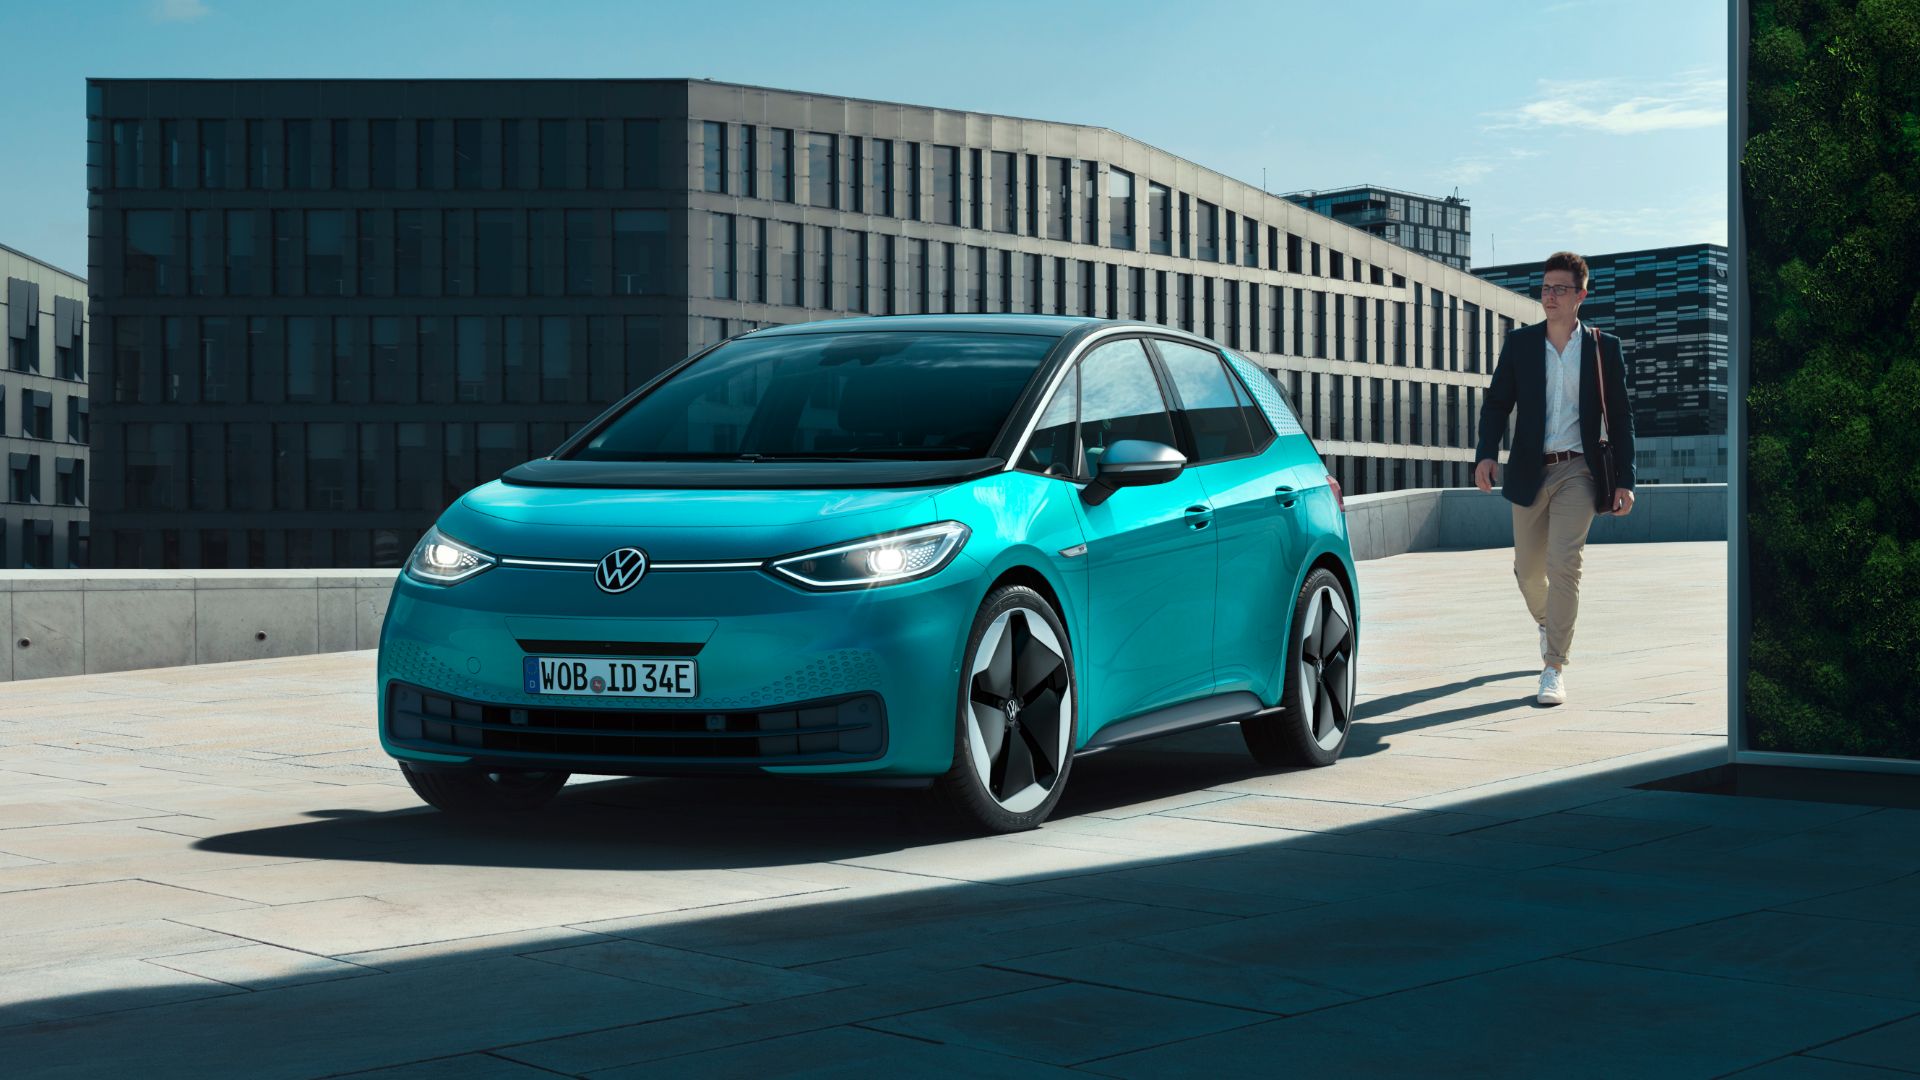 The most exciting electric cars to buy in 2020